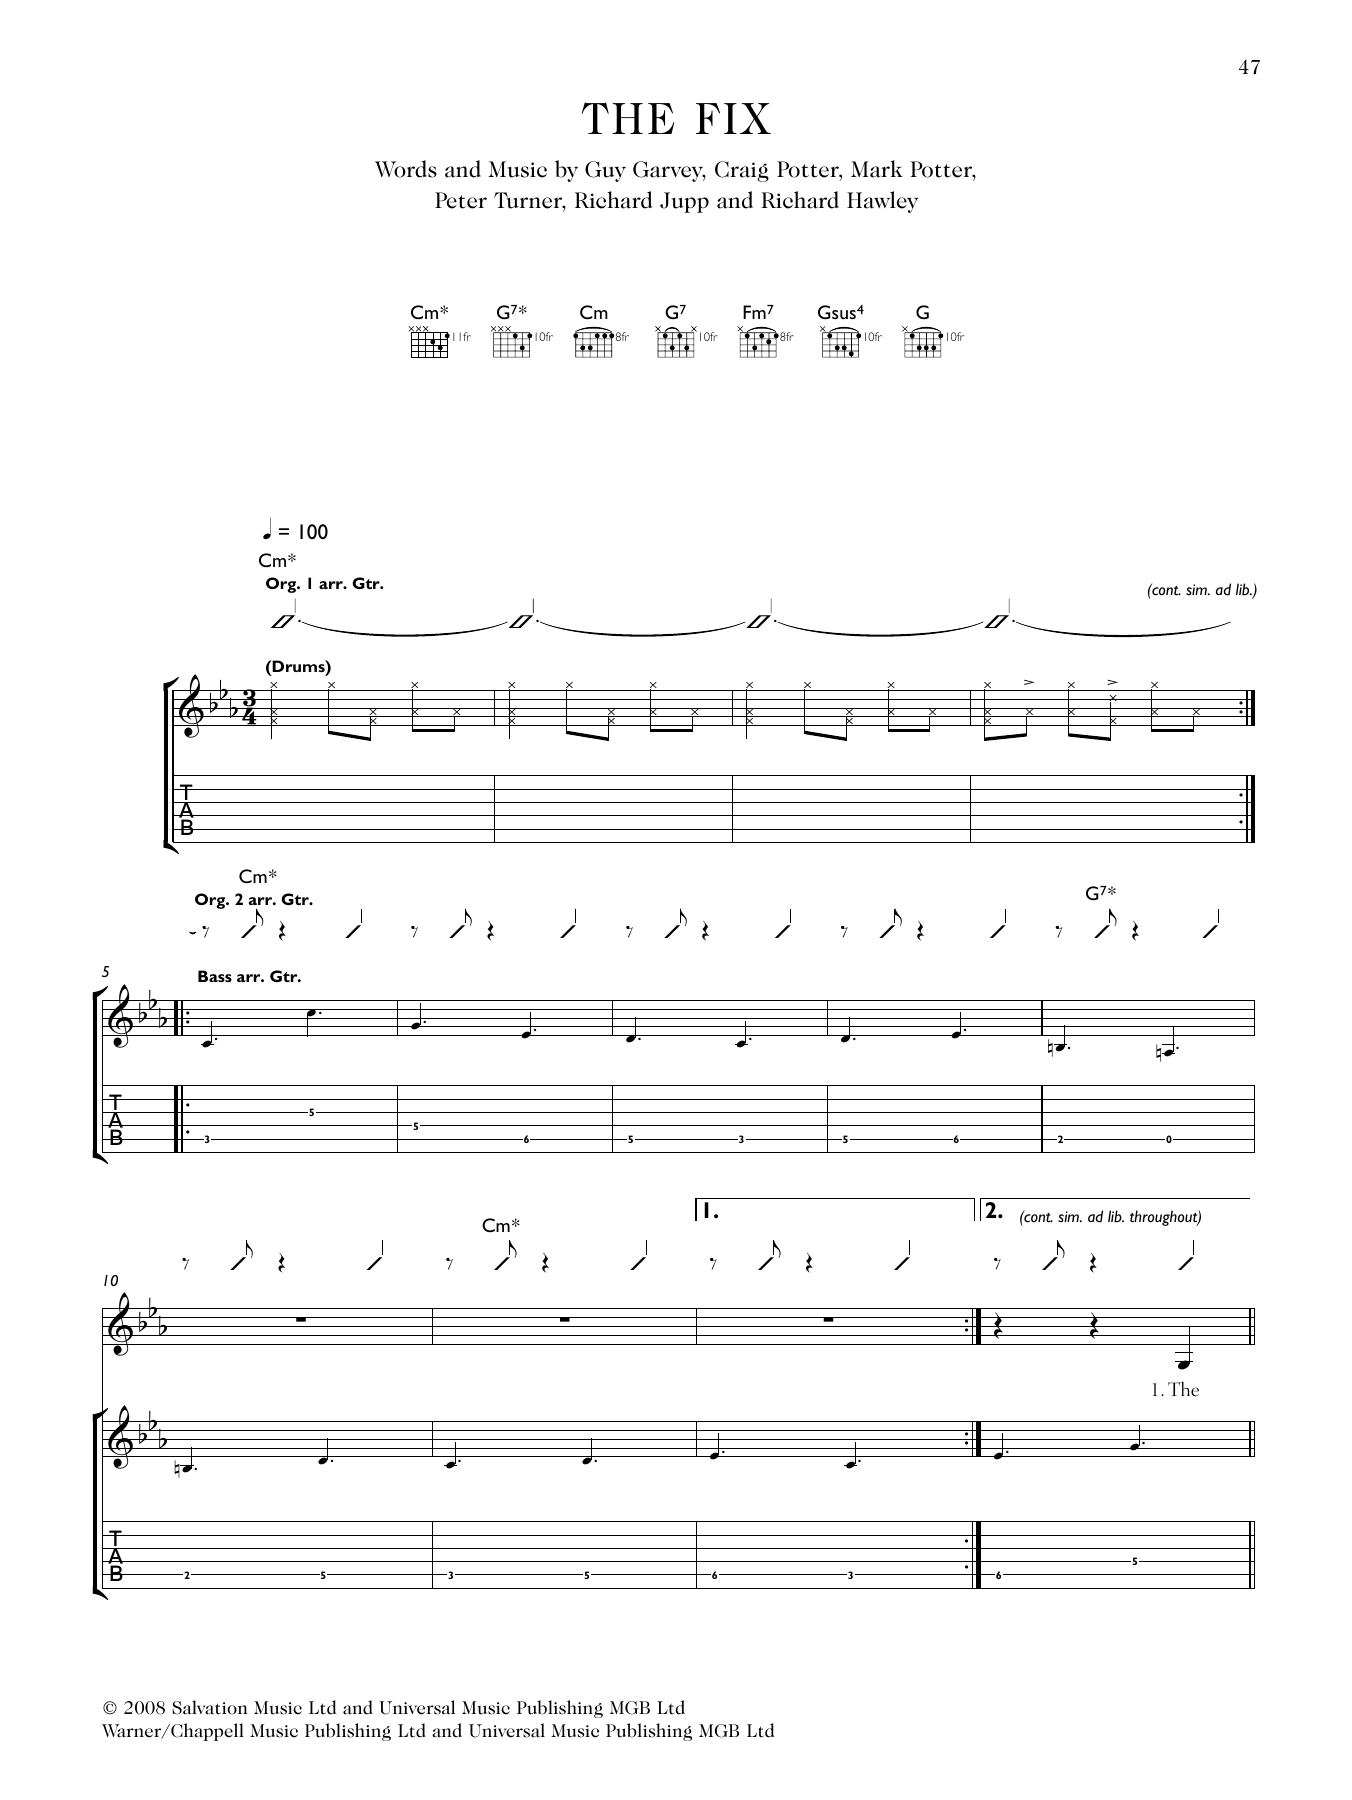 Download Elbow The Fix (featuring Richard Hawley) Sheet Music